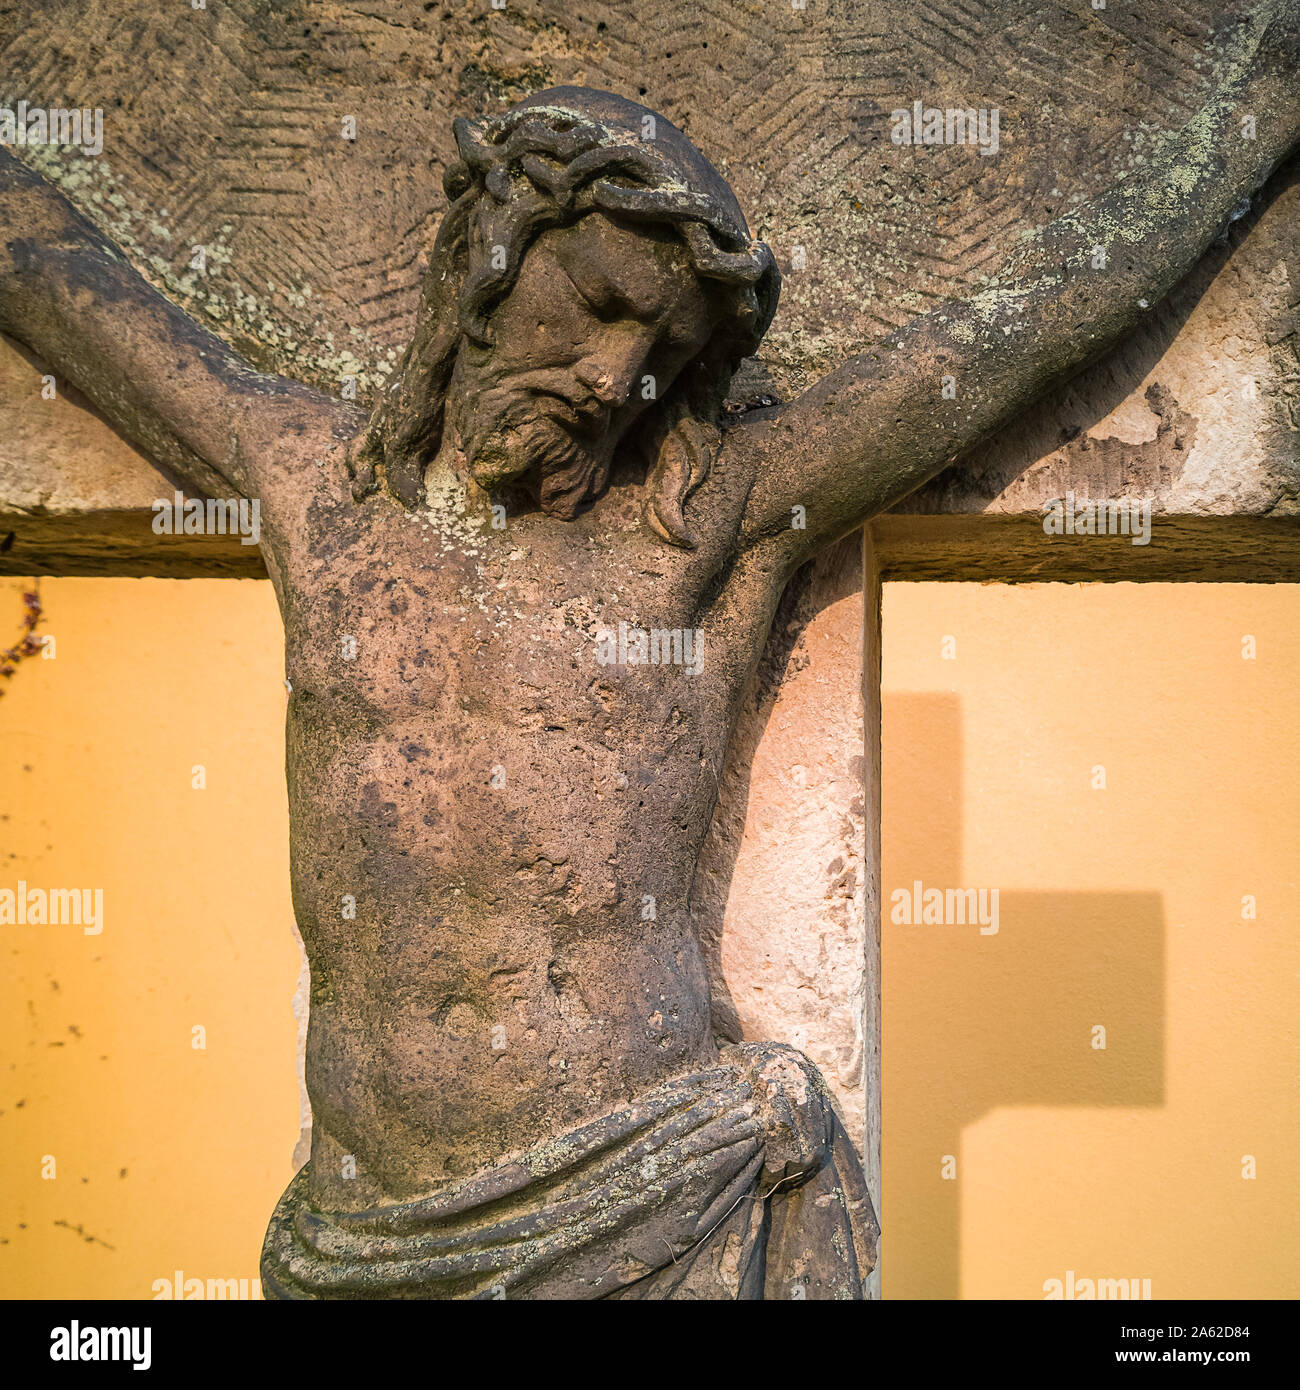 Stone crucifix and sculpture inside the churchyard of the Church Maria am Wasser (Mary By The Waters) in Hosterwitz, Dresden, Saxony, Germany. Stock Photo